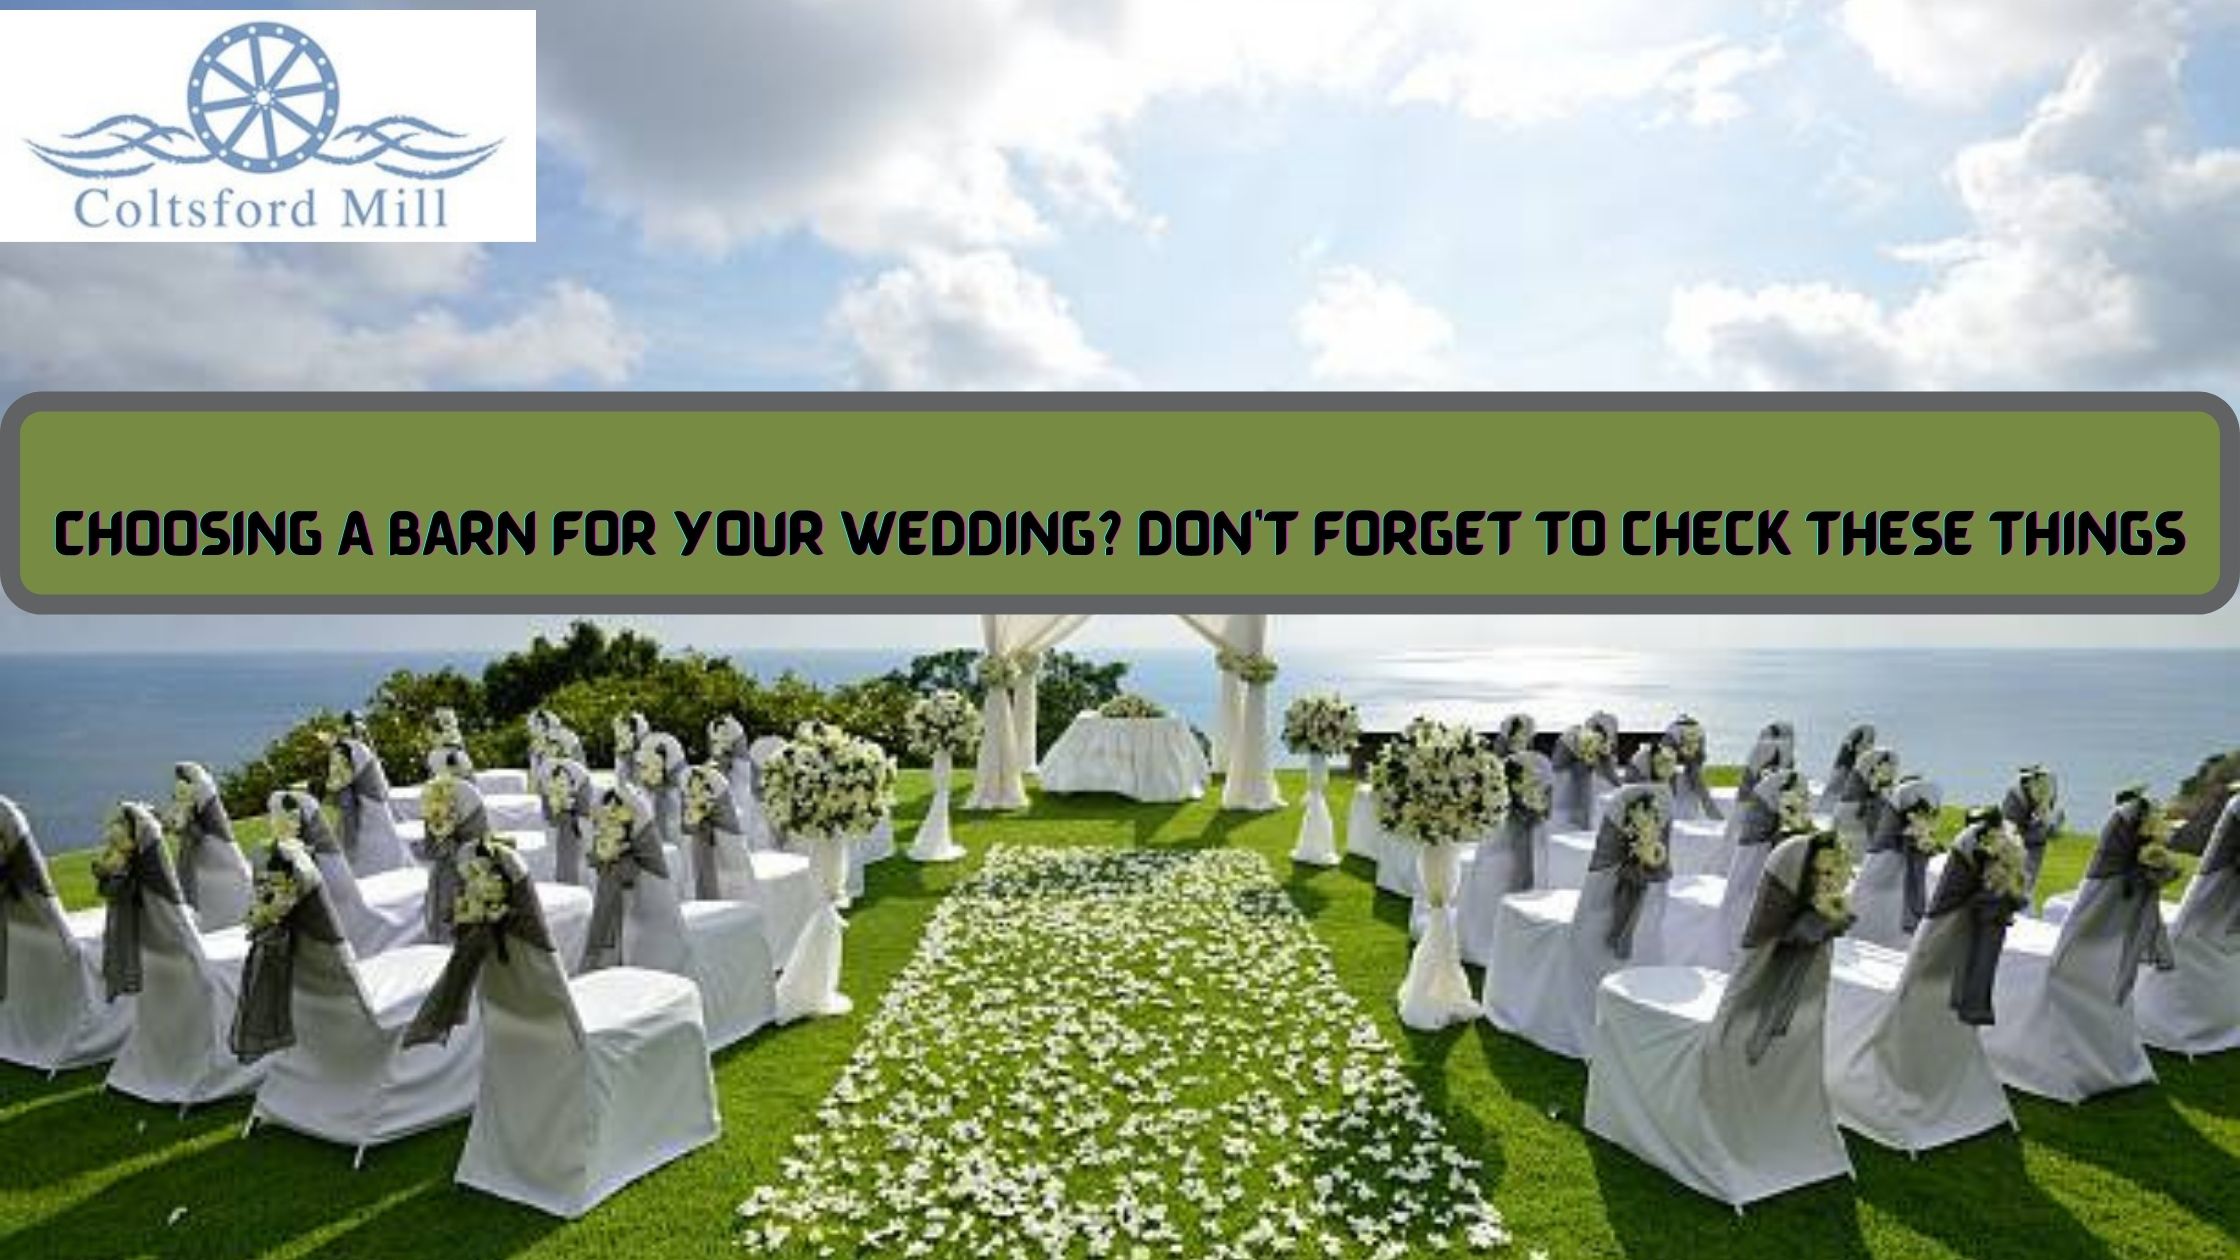 Choosing A Barn for Your Wedding? Don’t Forget to Check These Things